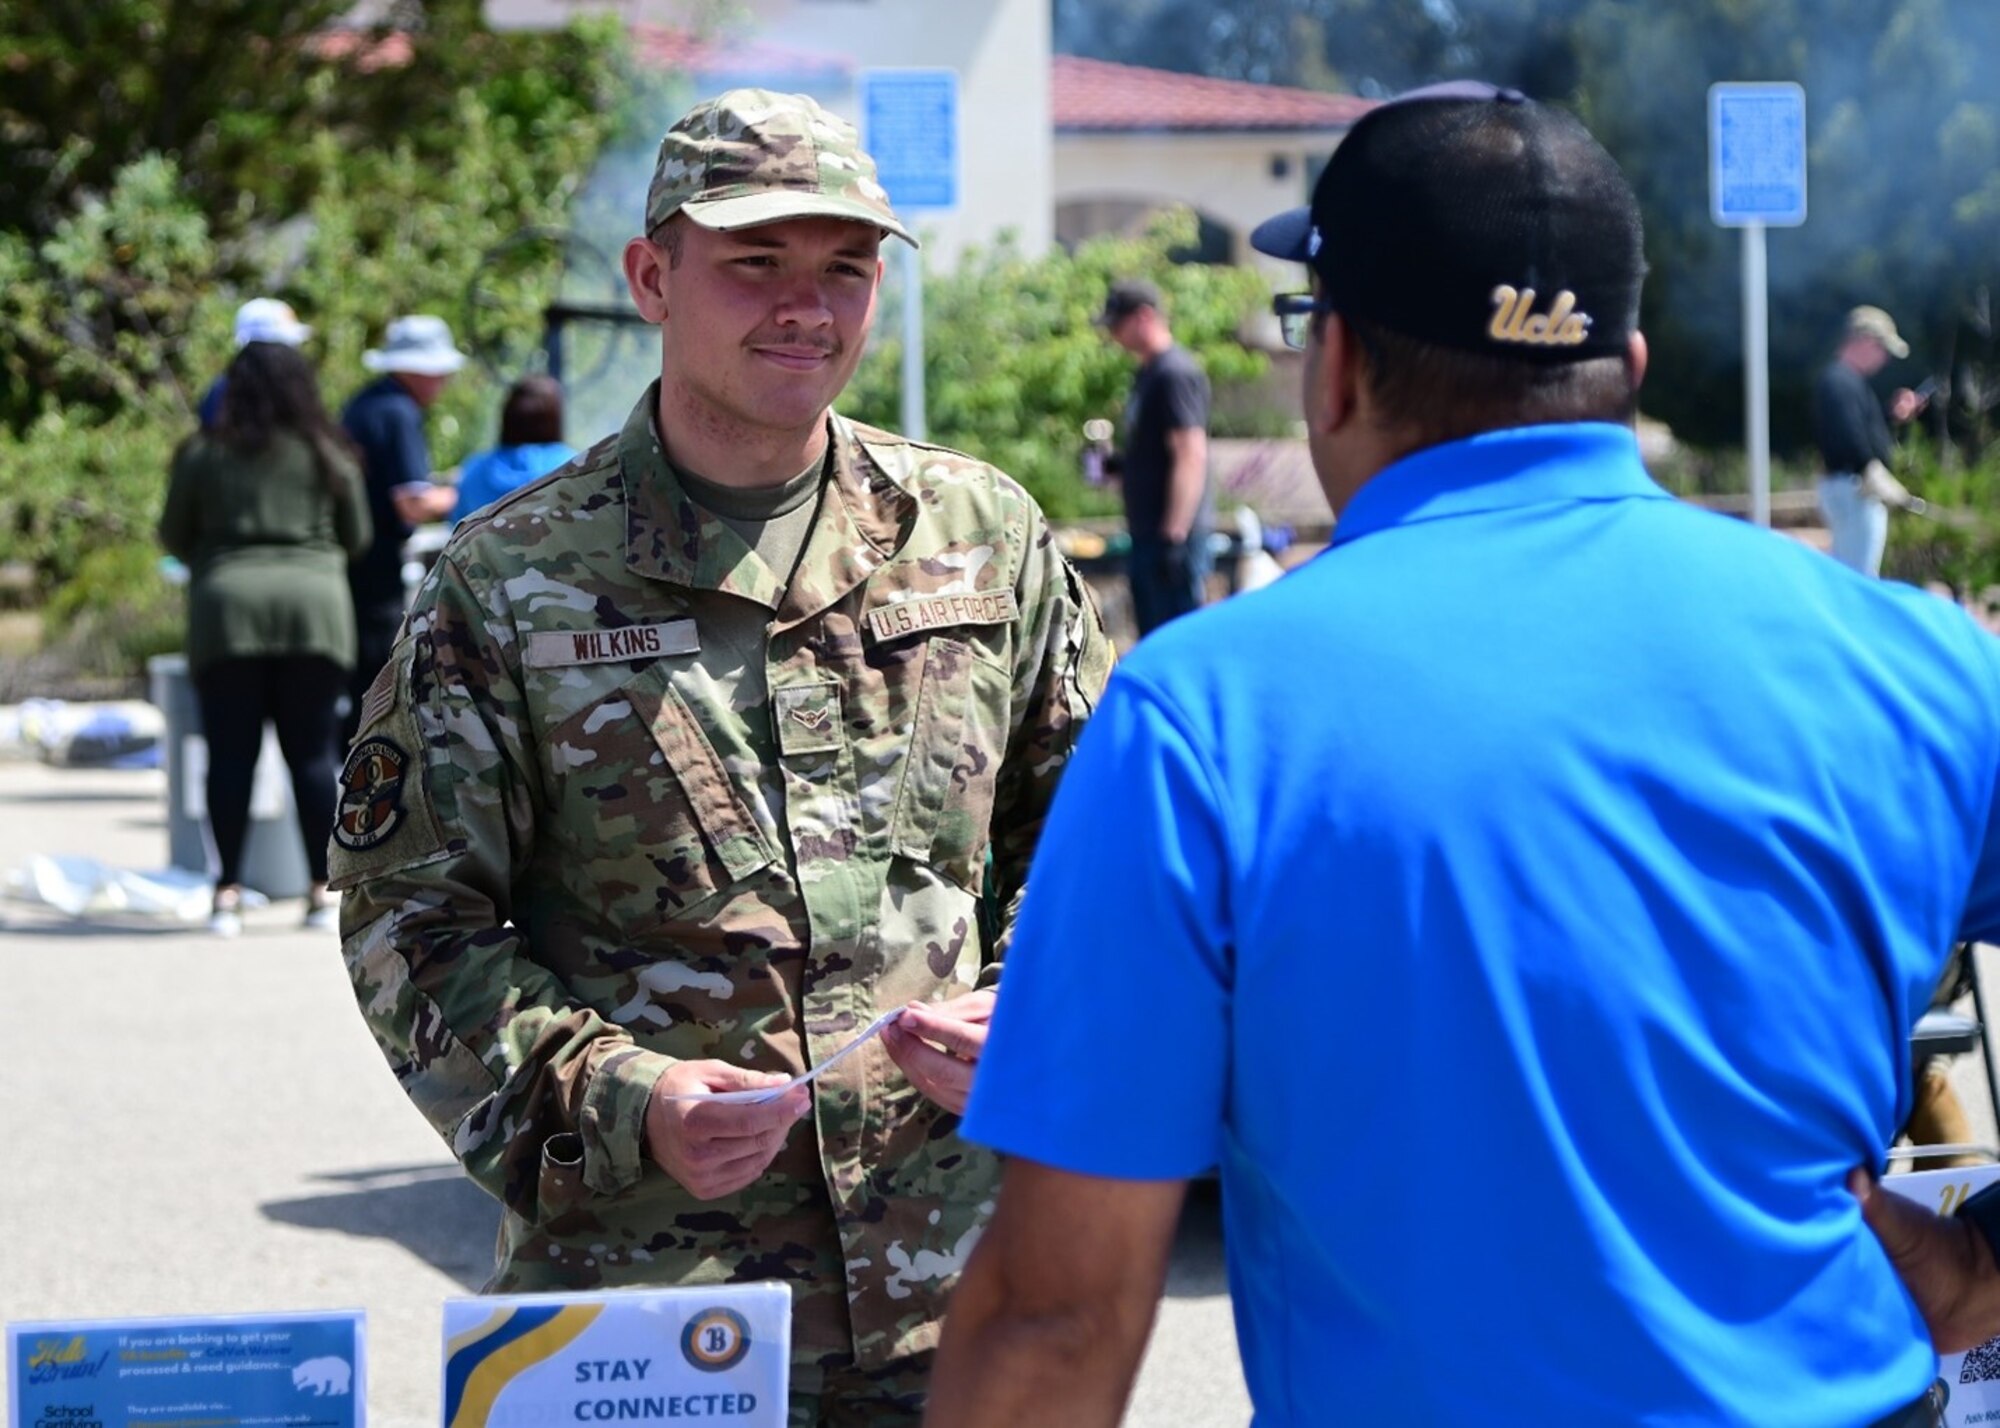 A man in uniform speaks with an individual representing a college.